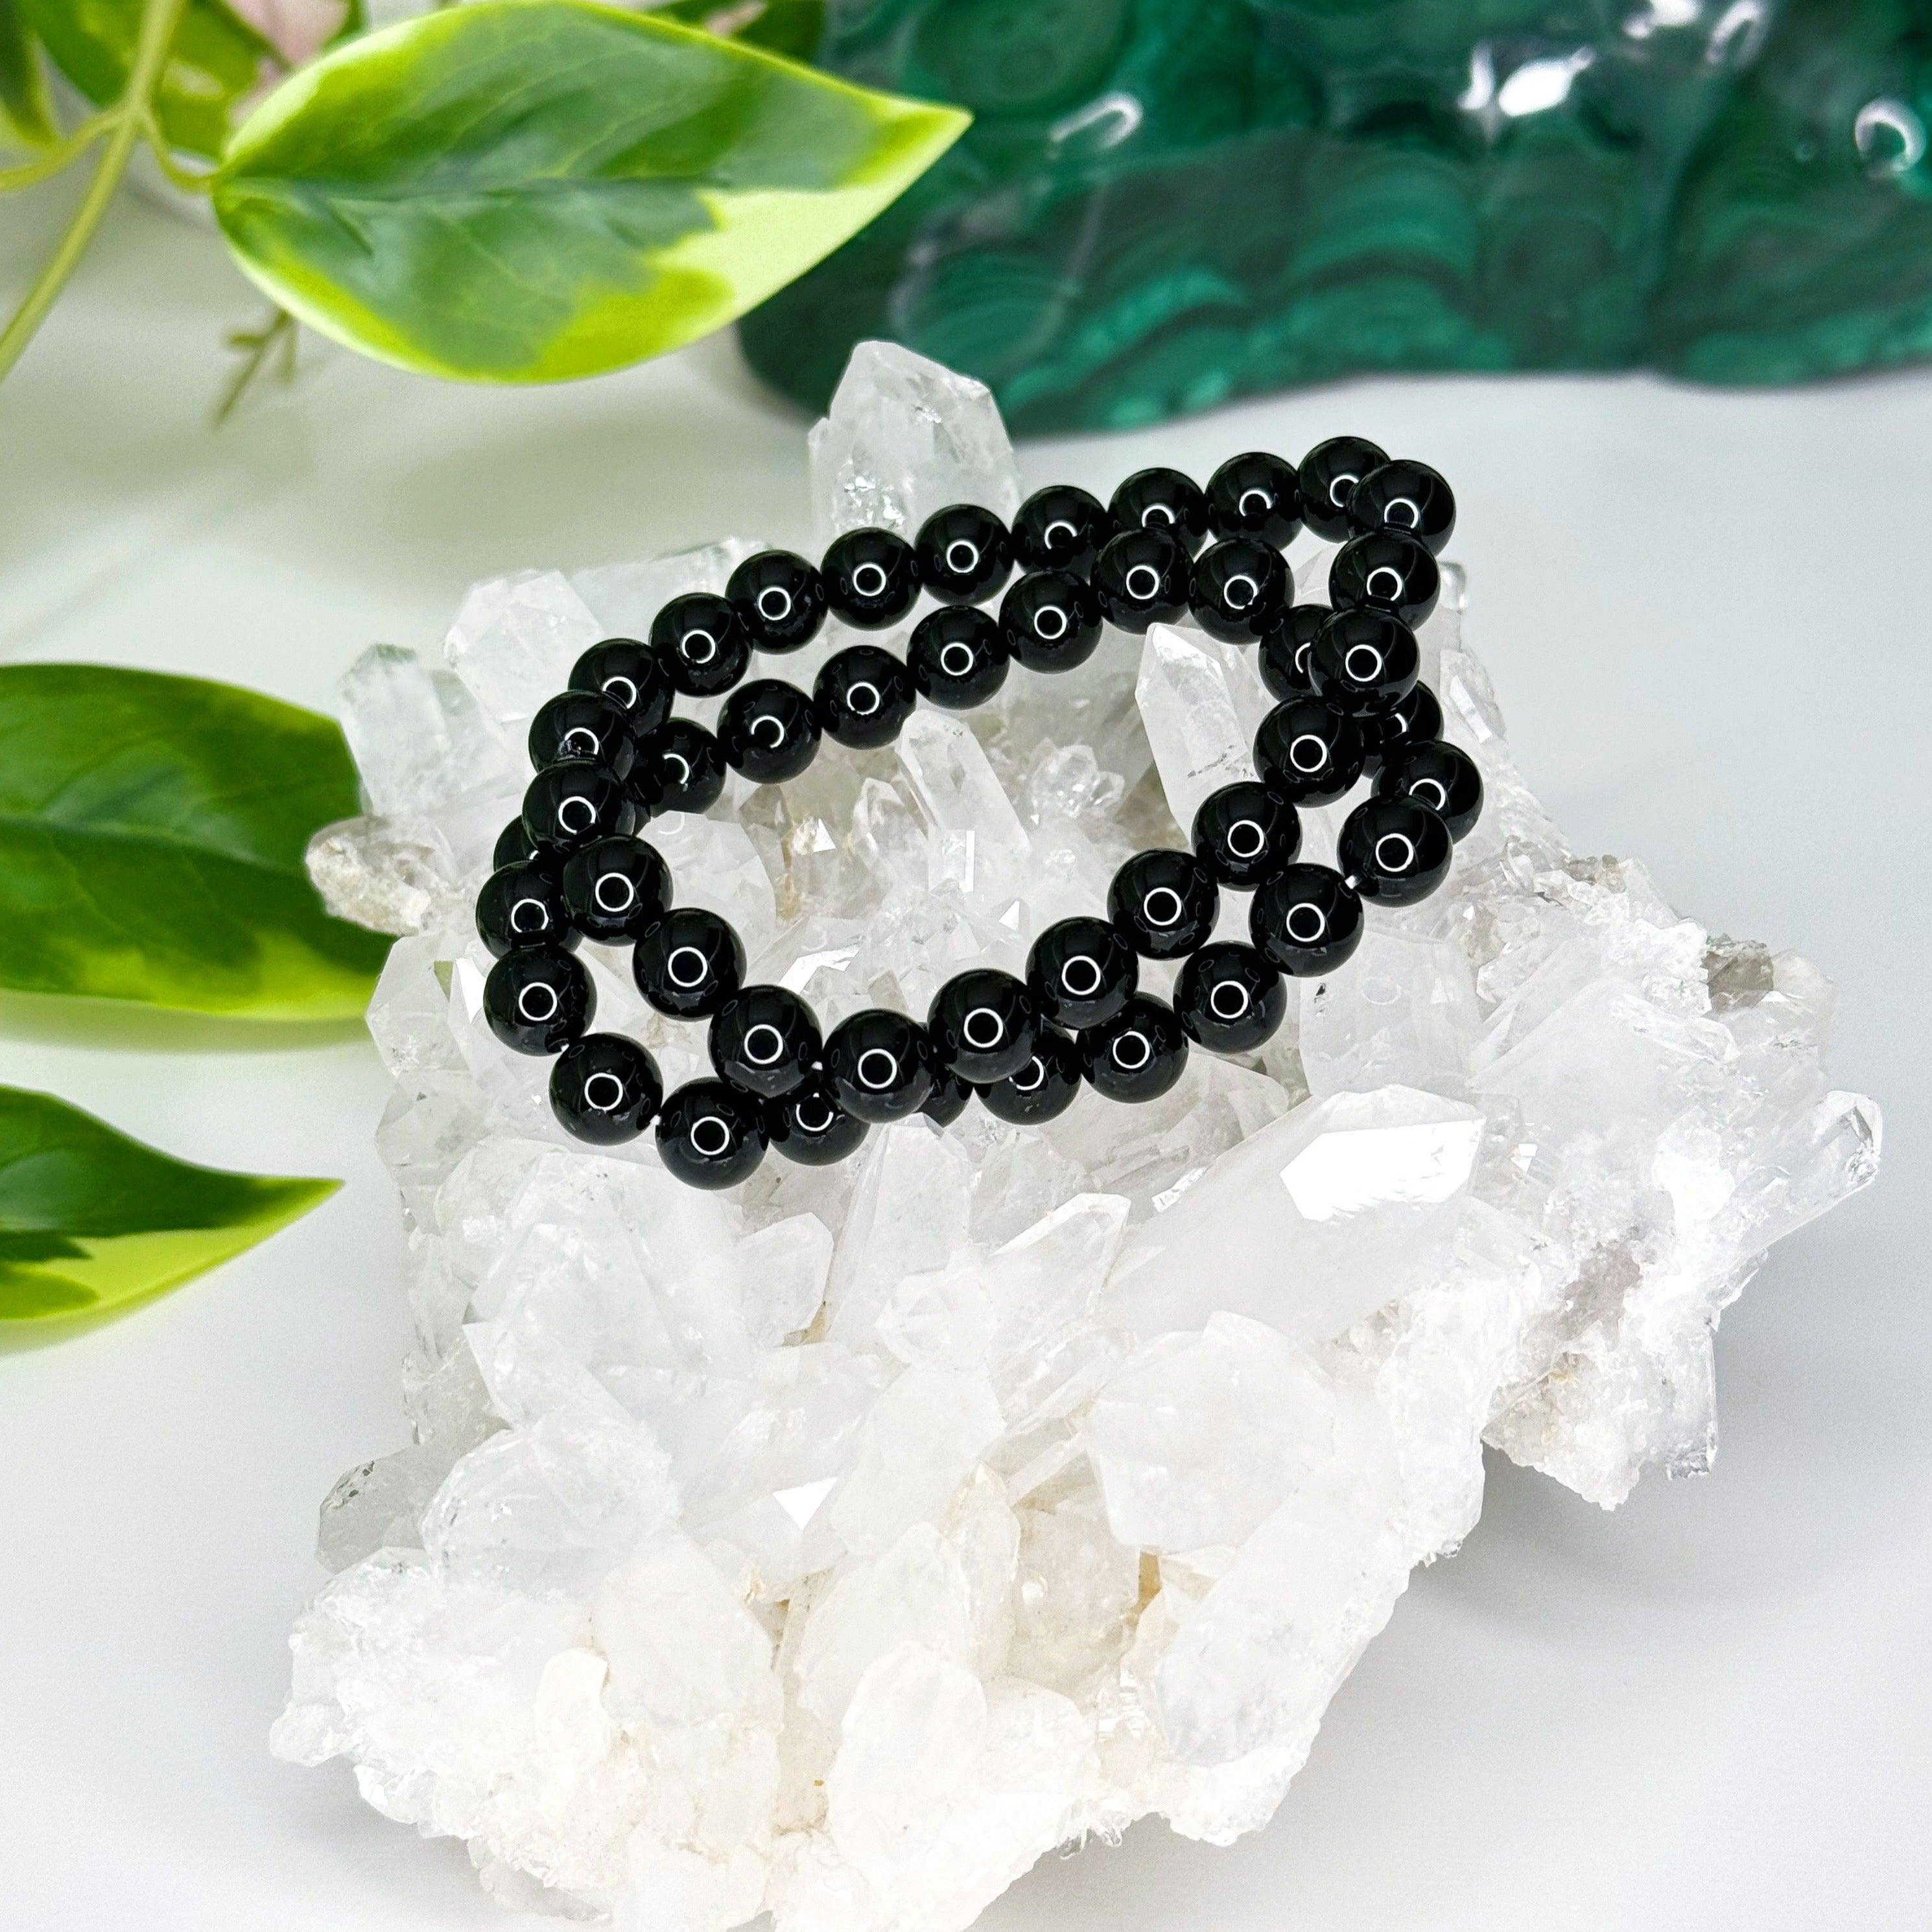 BLACK ONYX 8mm - HANDMADE CRYSTAL BRACELET - 8mm, black, black onyx, bracelet, crystal bracelet, handmade bracelet, jewelry, market bracelet, protection gift bundle, recently added, solstice collection, Wearable, winter solstice collection - The Mineral Maven